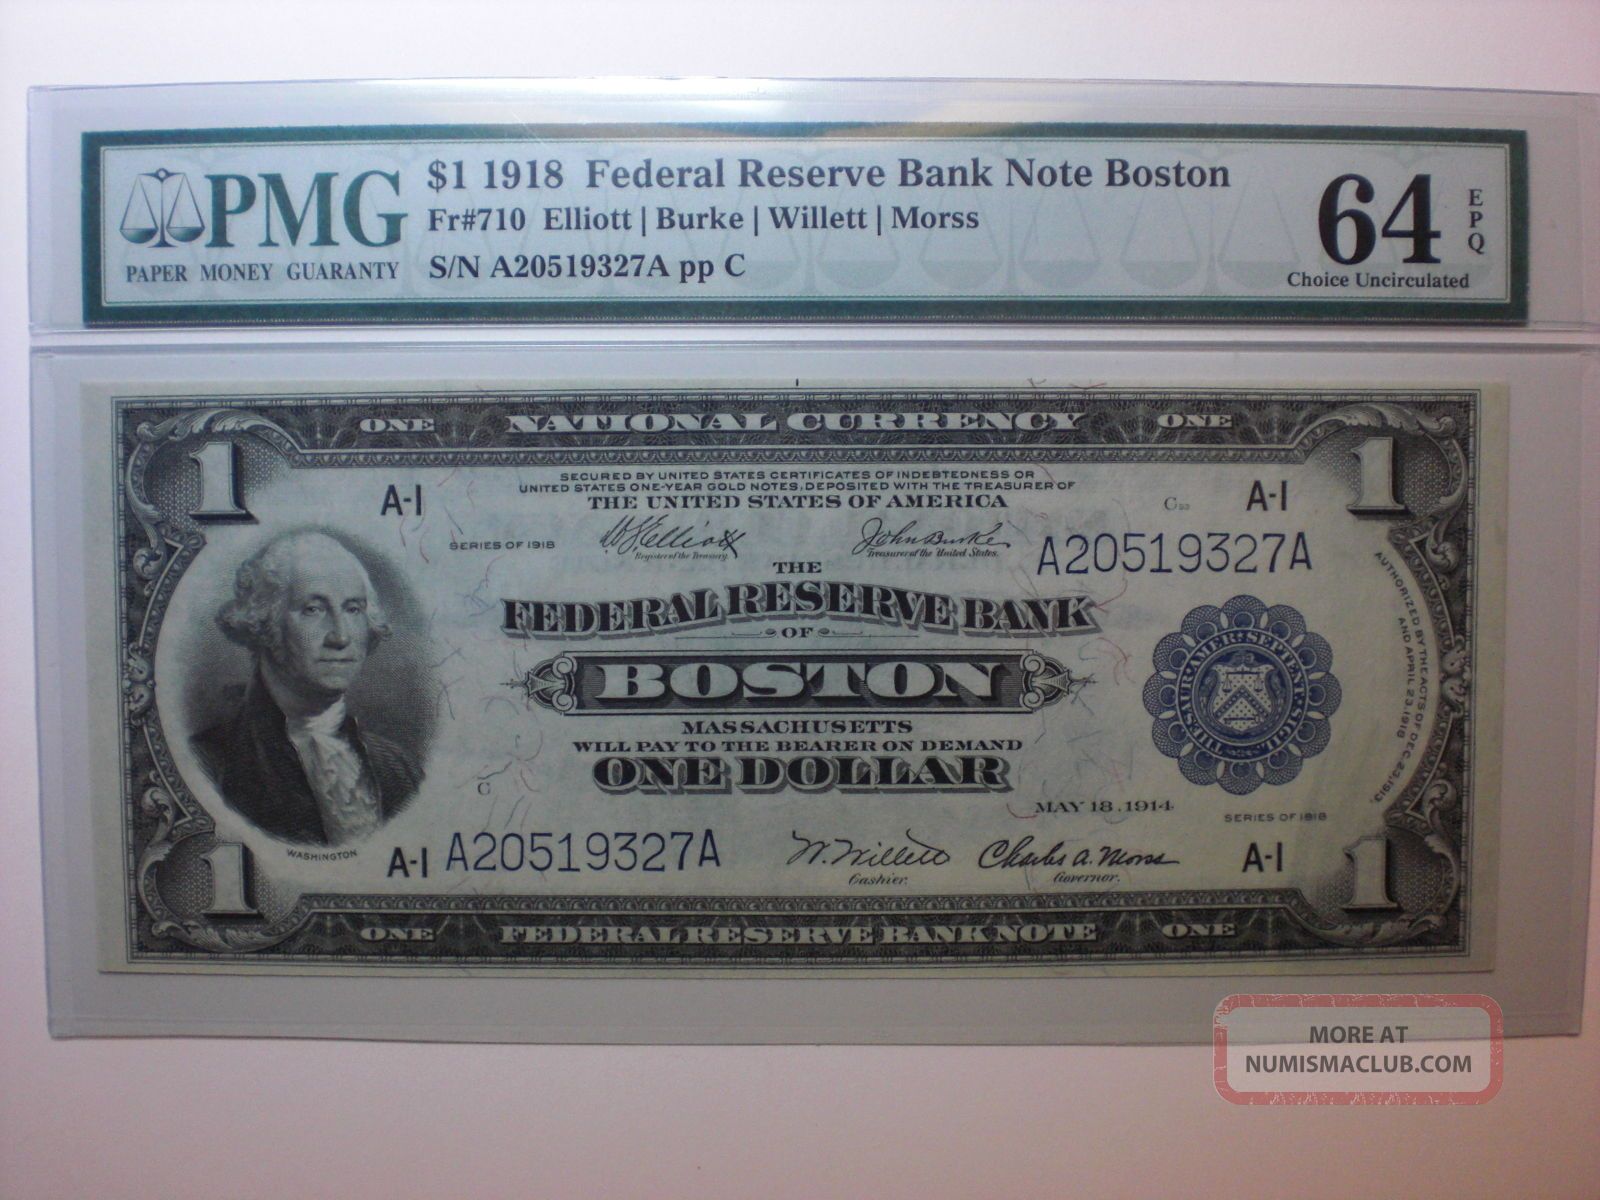 Fr 710 $1 1918 Federal Reserve Bank Note Boston - Pmg 64epq - Uncirculated Paper Money: US photo